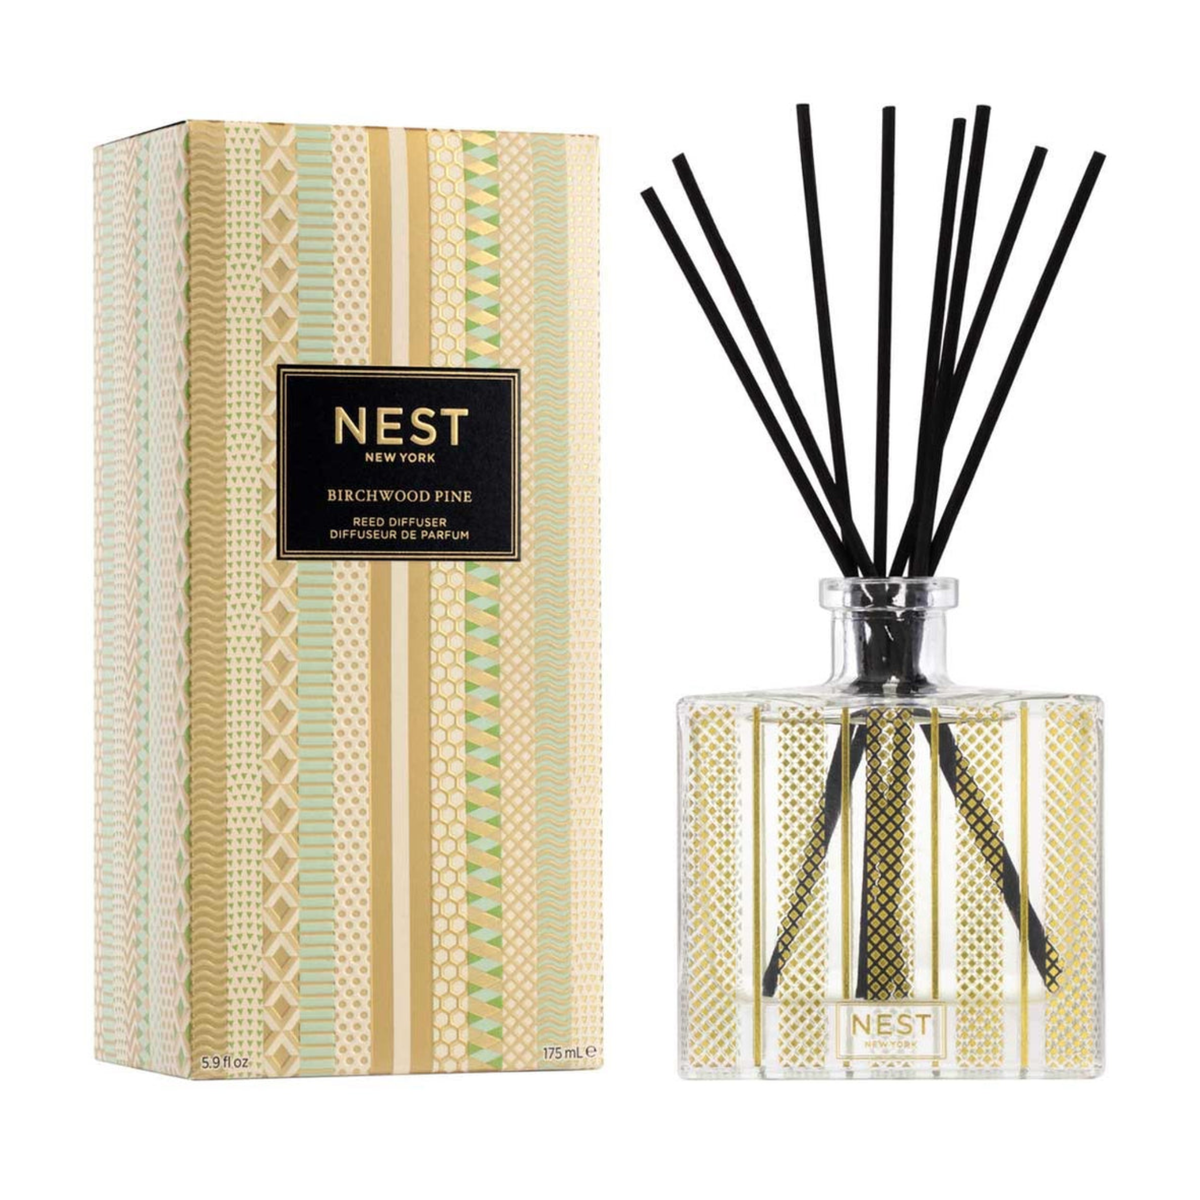 Product Image of Nest New York  Birchwood Pine Reed Diffuser with Box